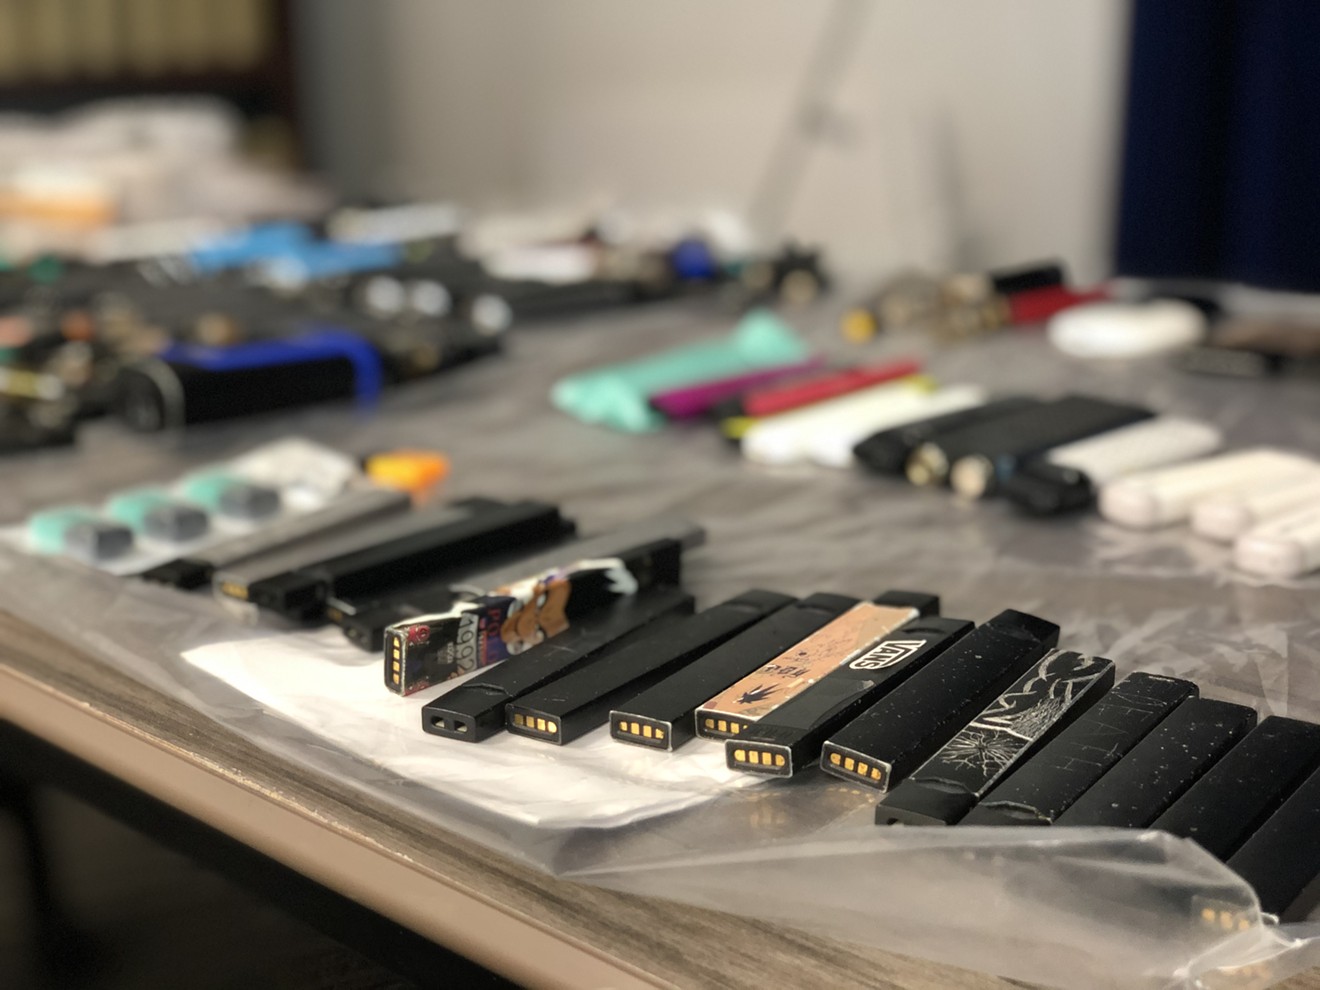 JUUL products confiscated from Arizona schools on display at the press conference on Tuesday.